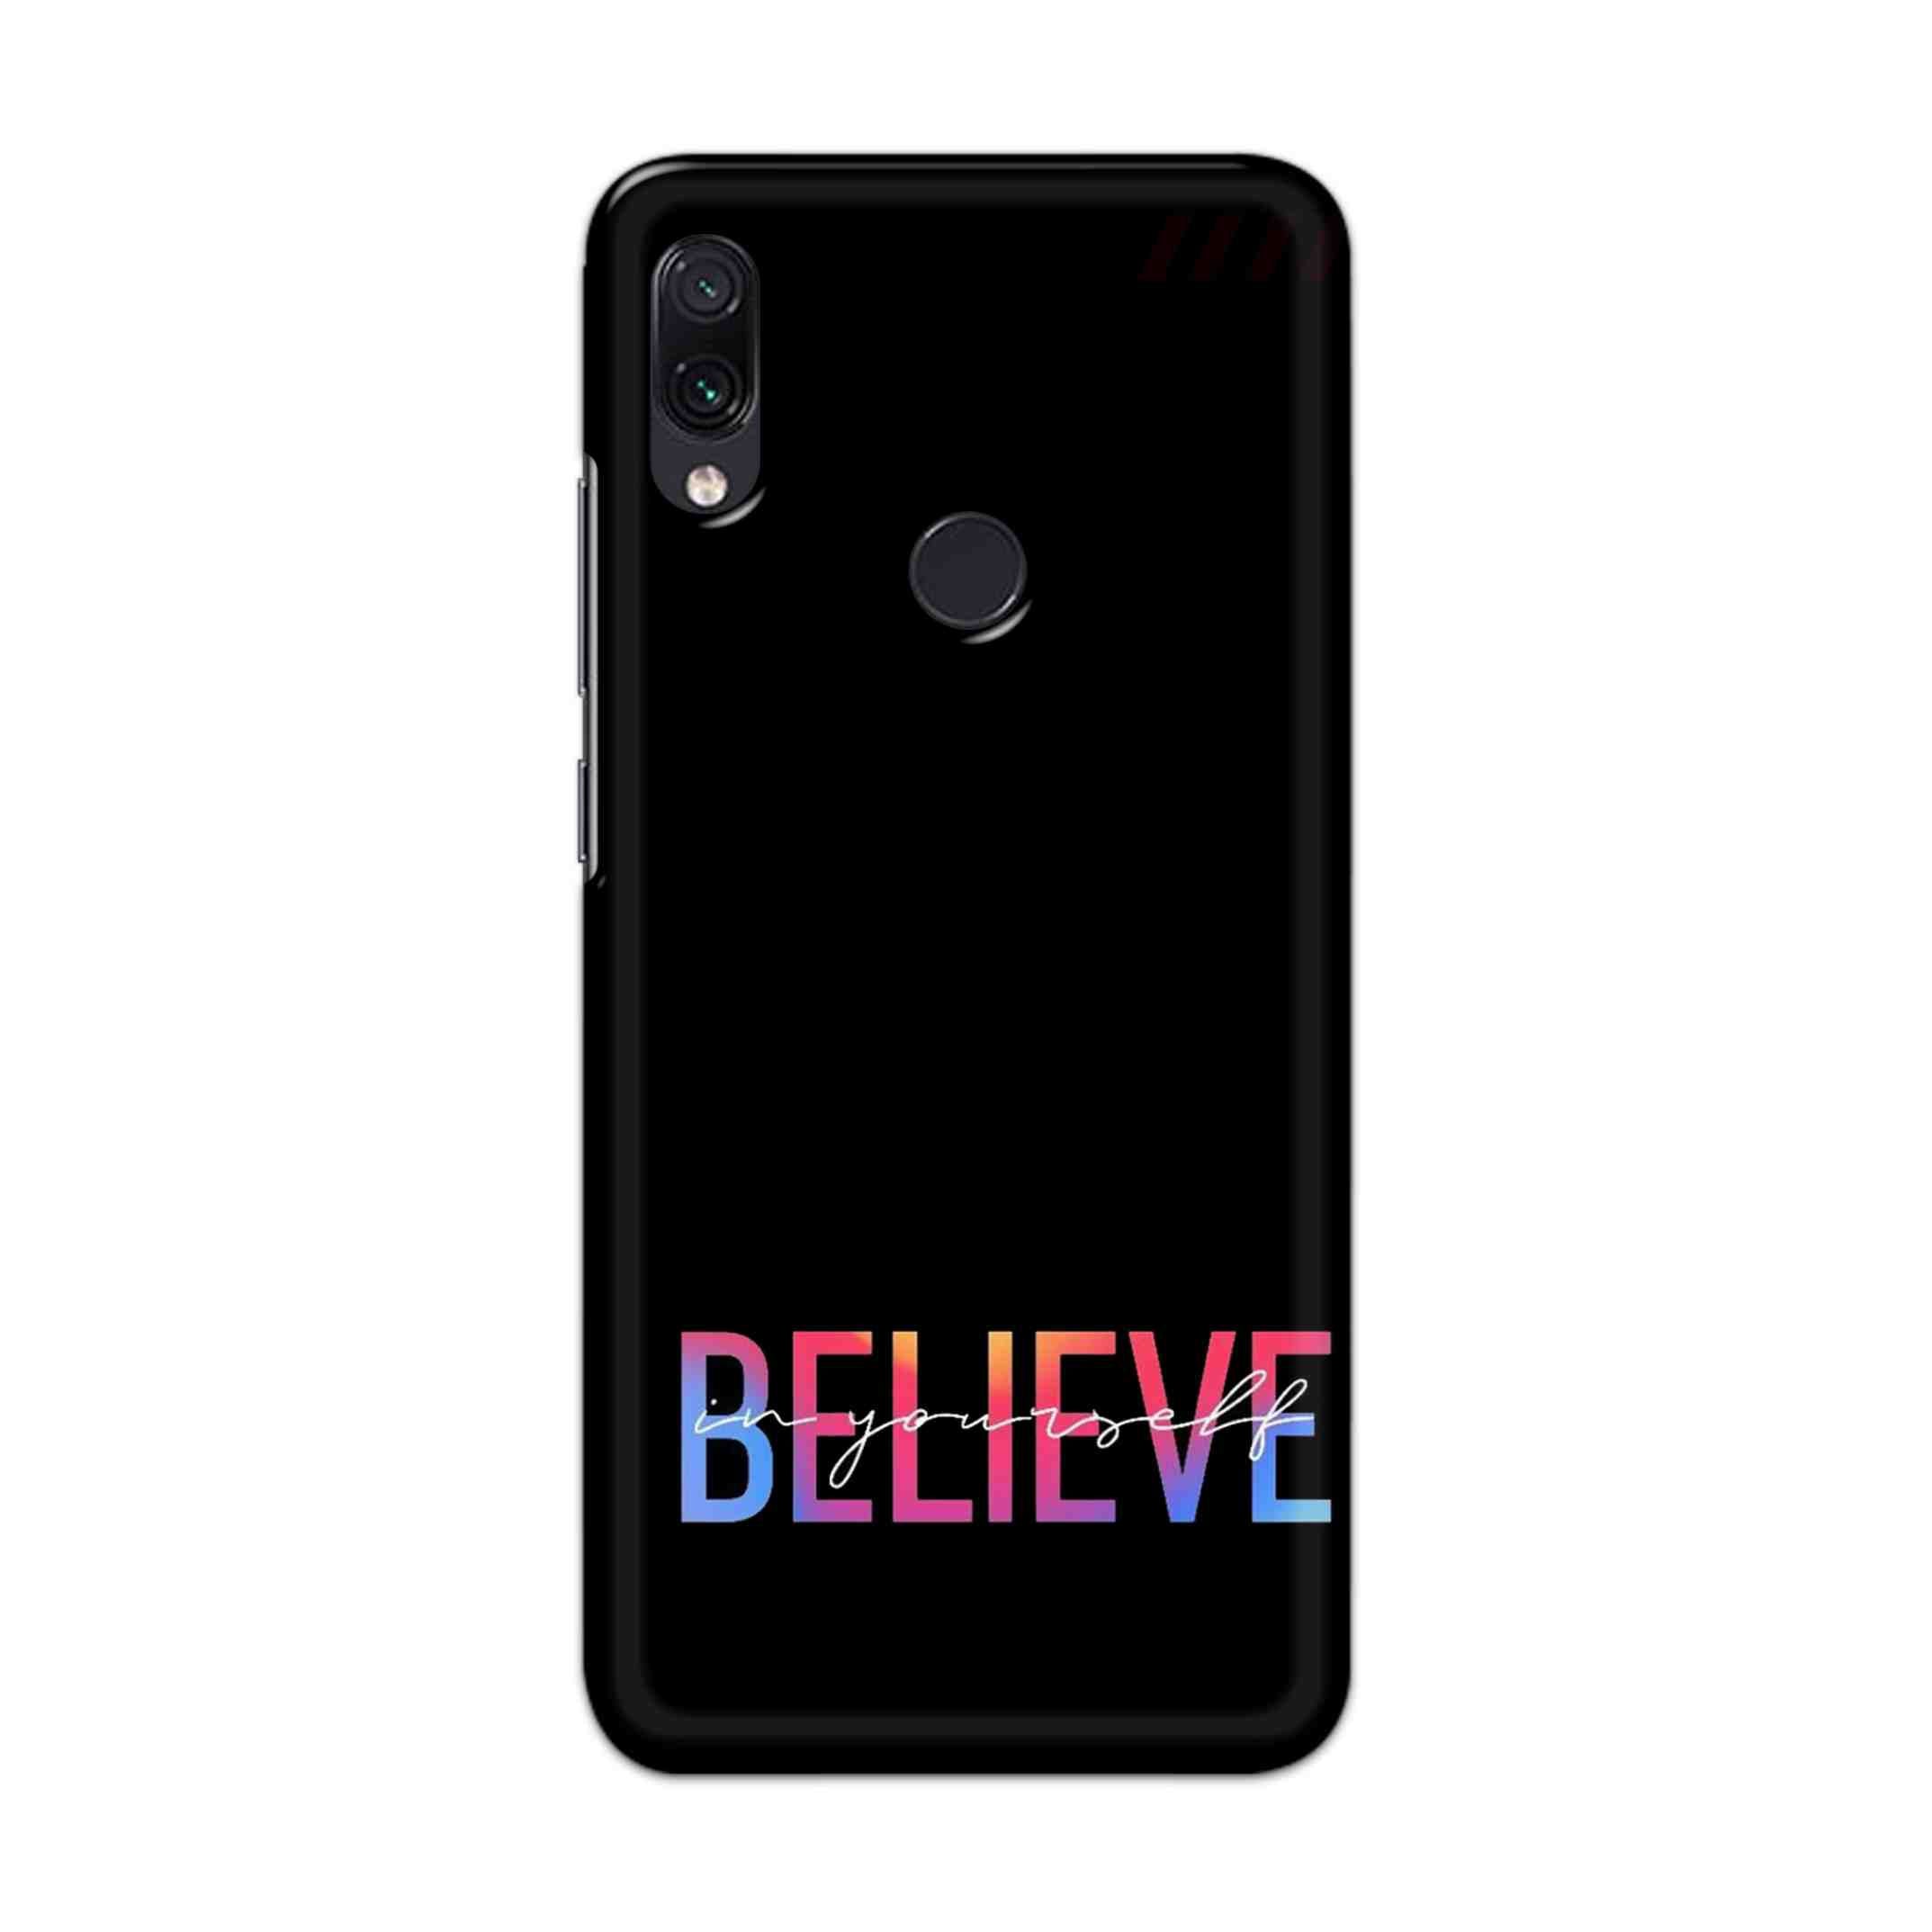 Buy Believe Hard Back Mobile Phone Case Cover For Redmi Note 7 / Note 7 Pro Online